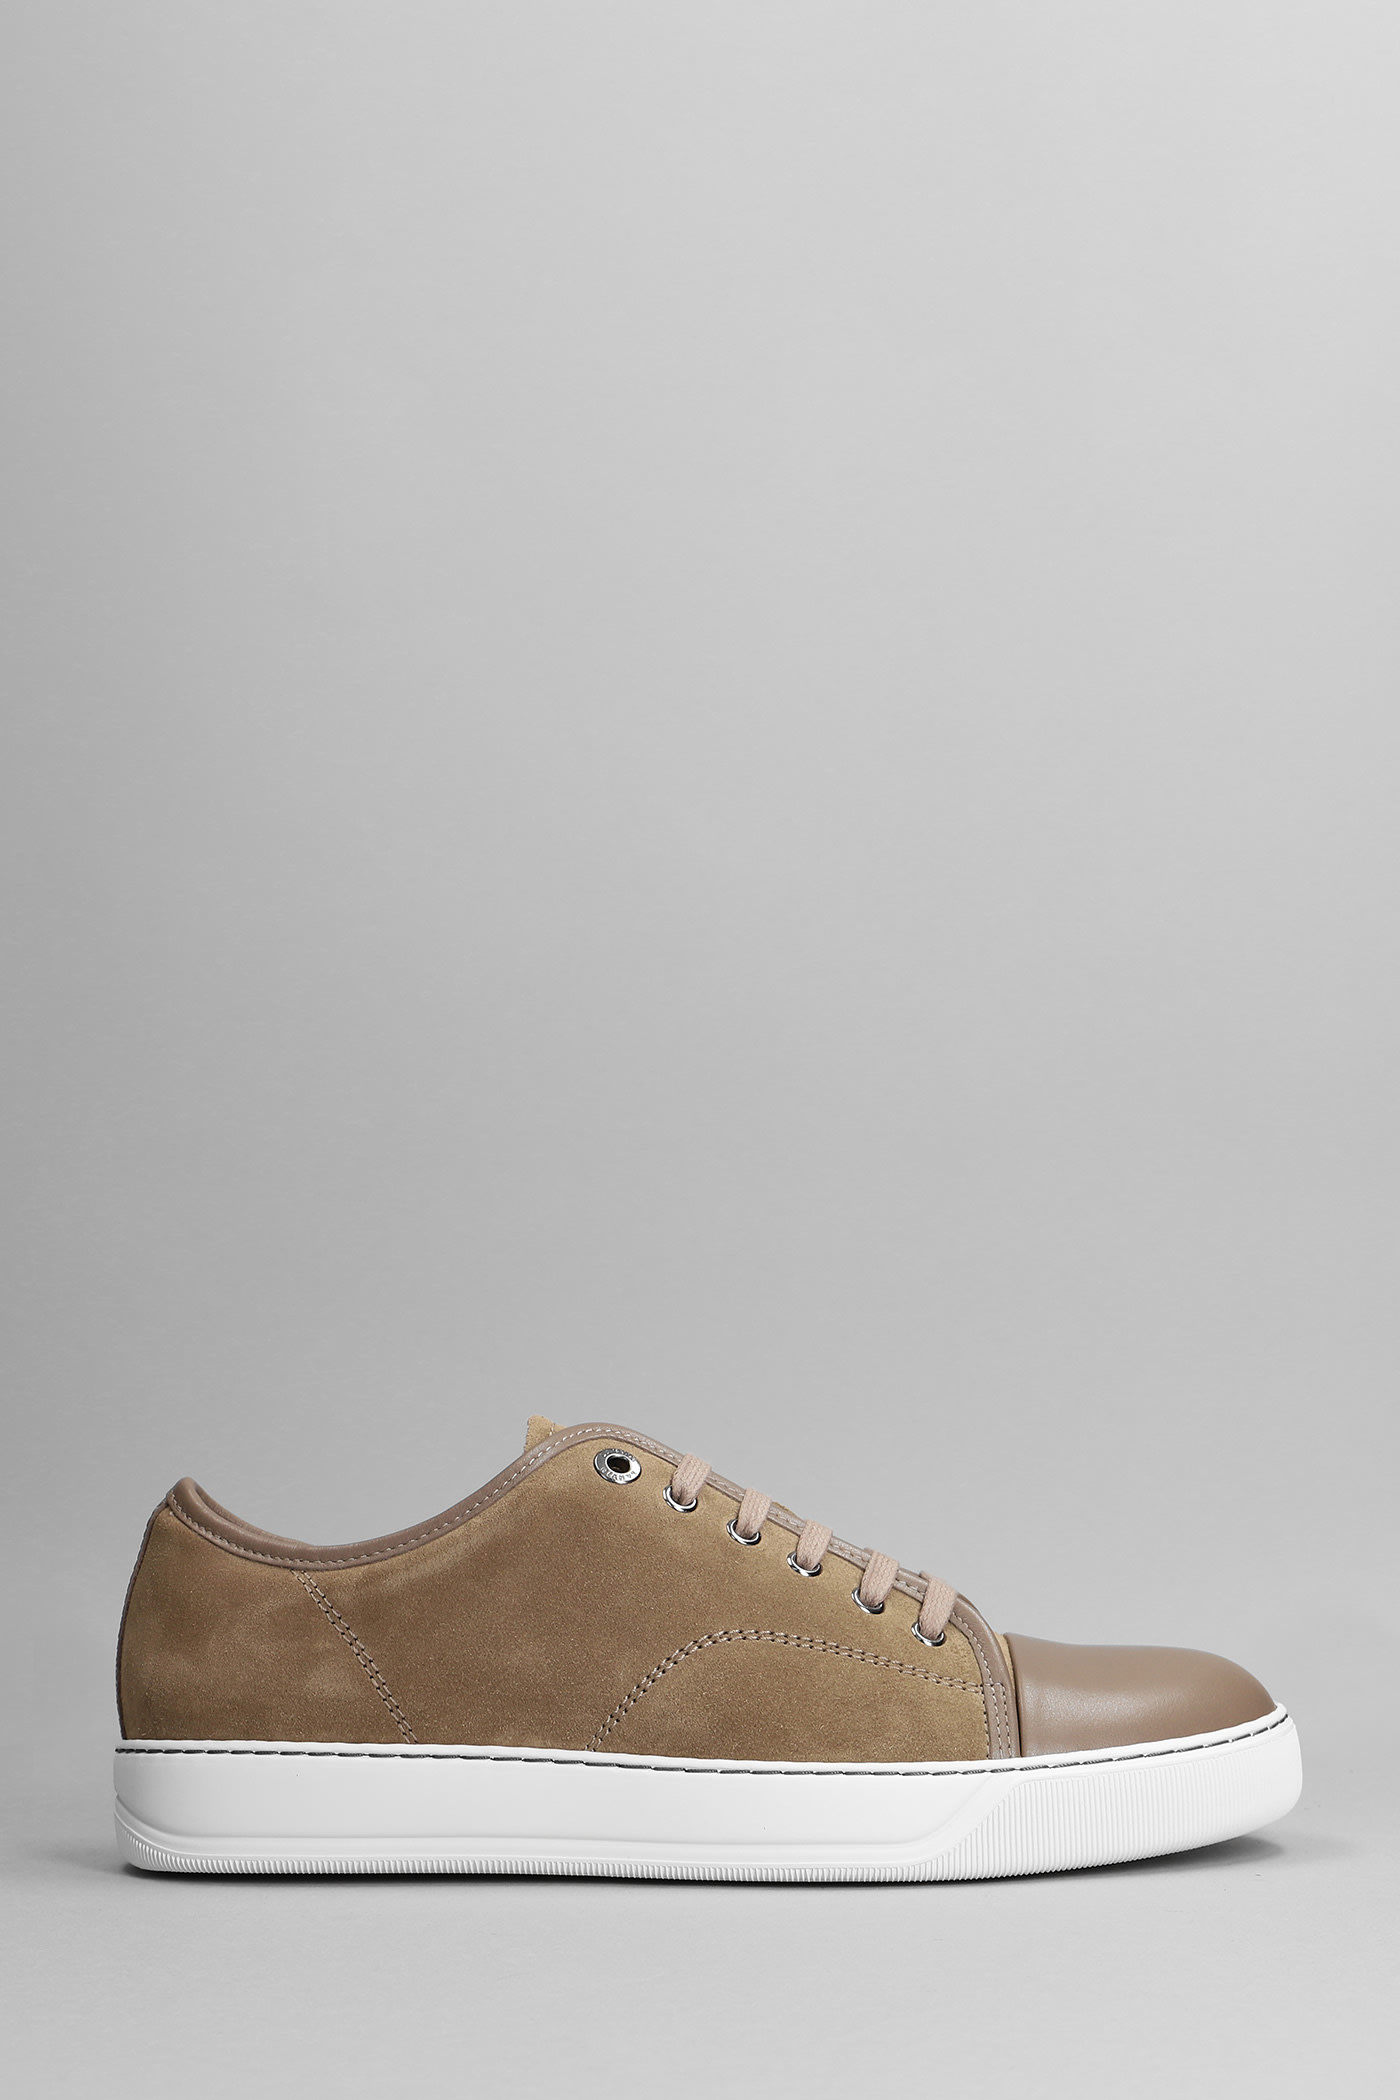 Lanvin Dbb1 Sneakers In Beige Suede And Leather